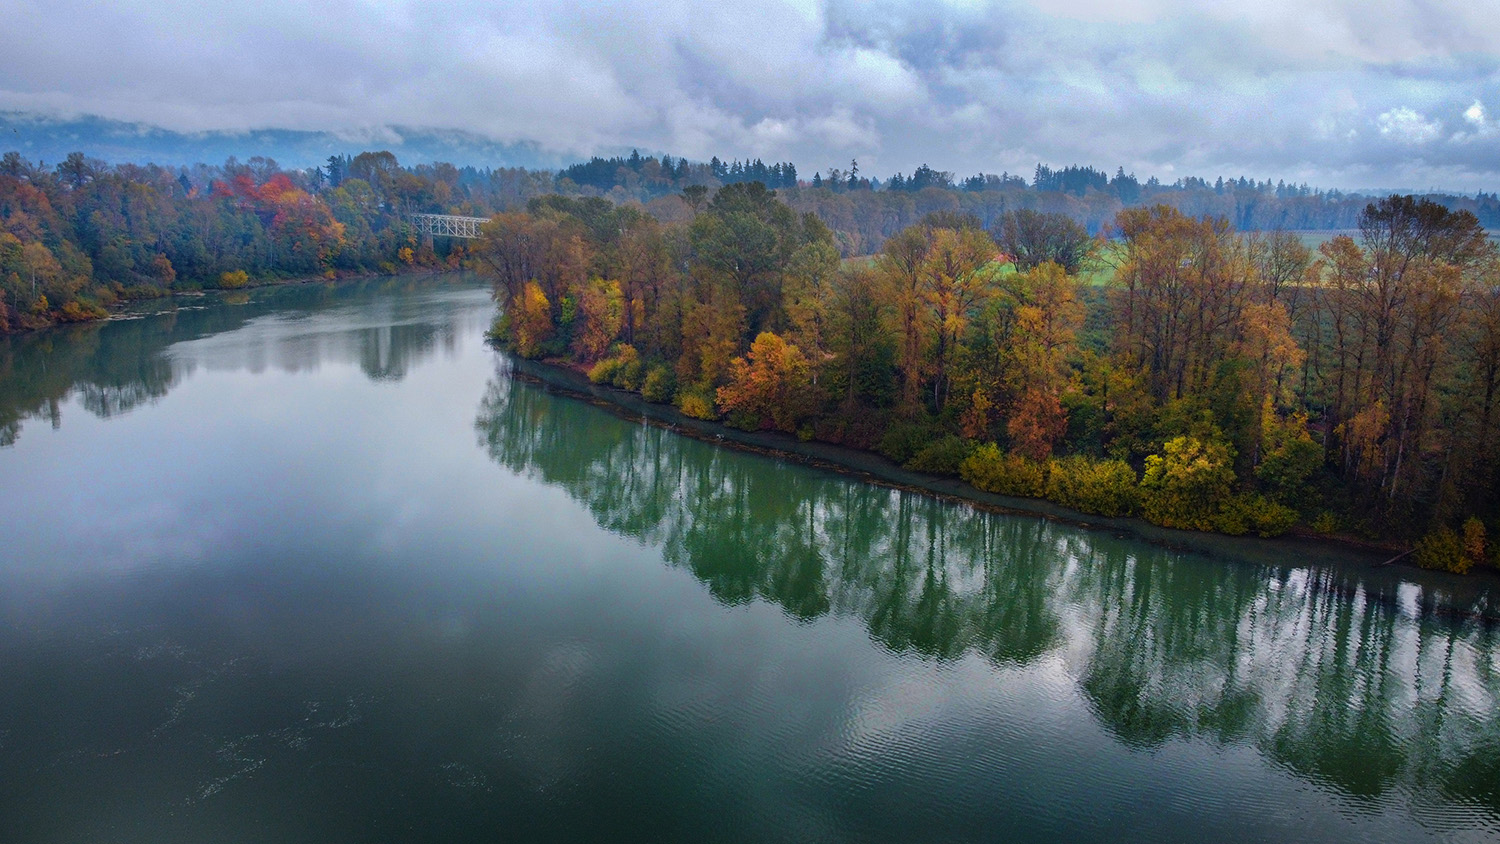 Willamette River at Rogers Landing - Newberg - Photo by Ron Miller